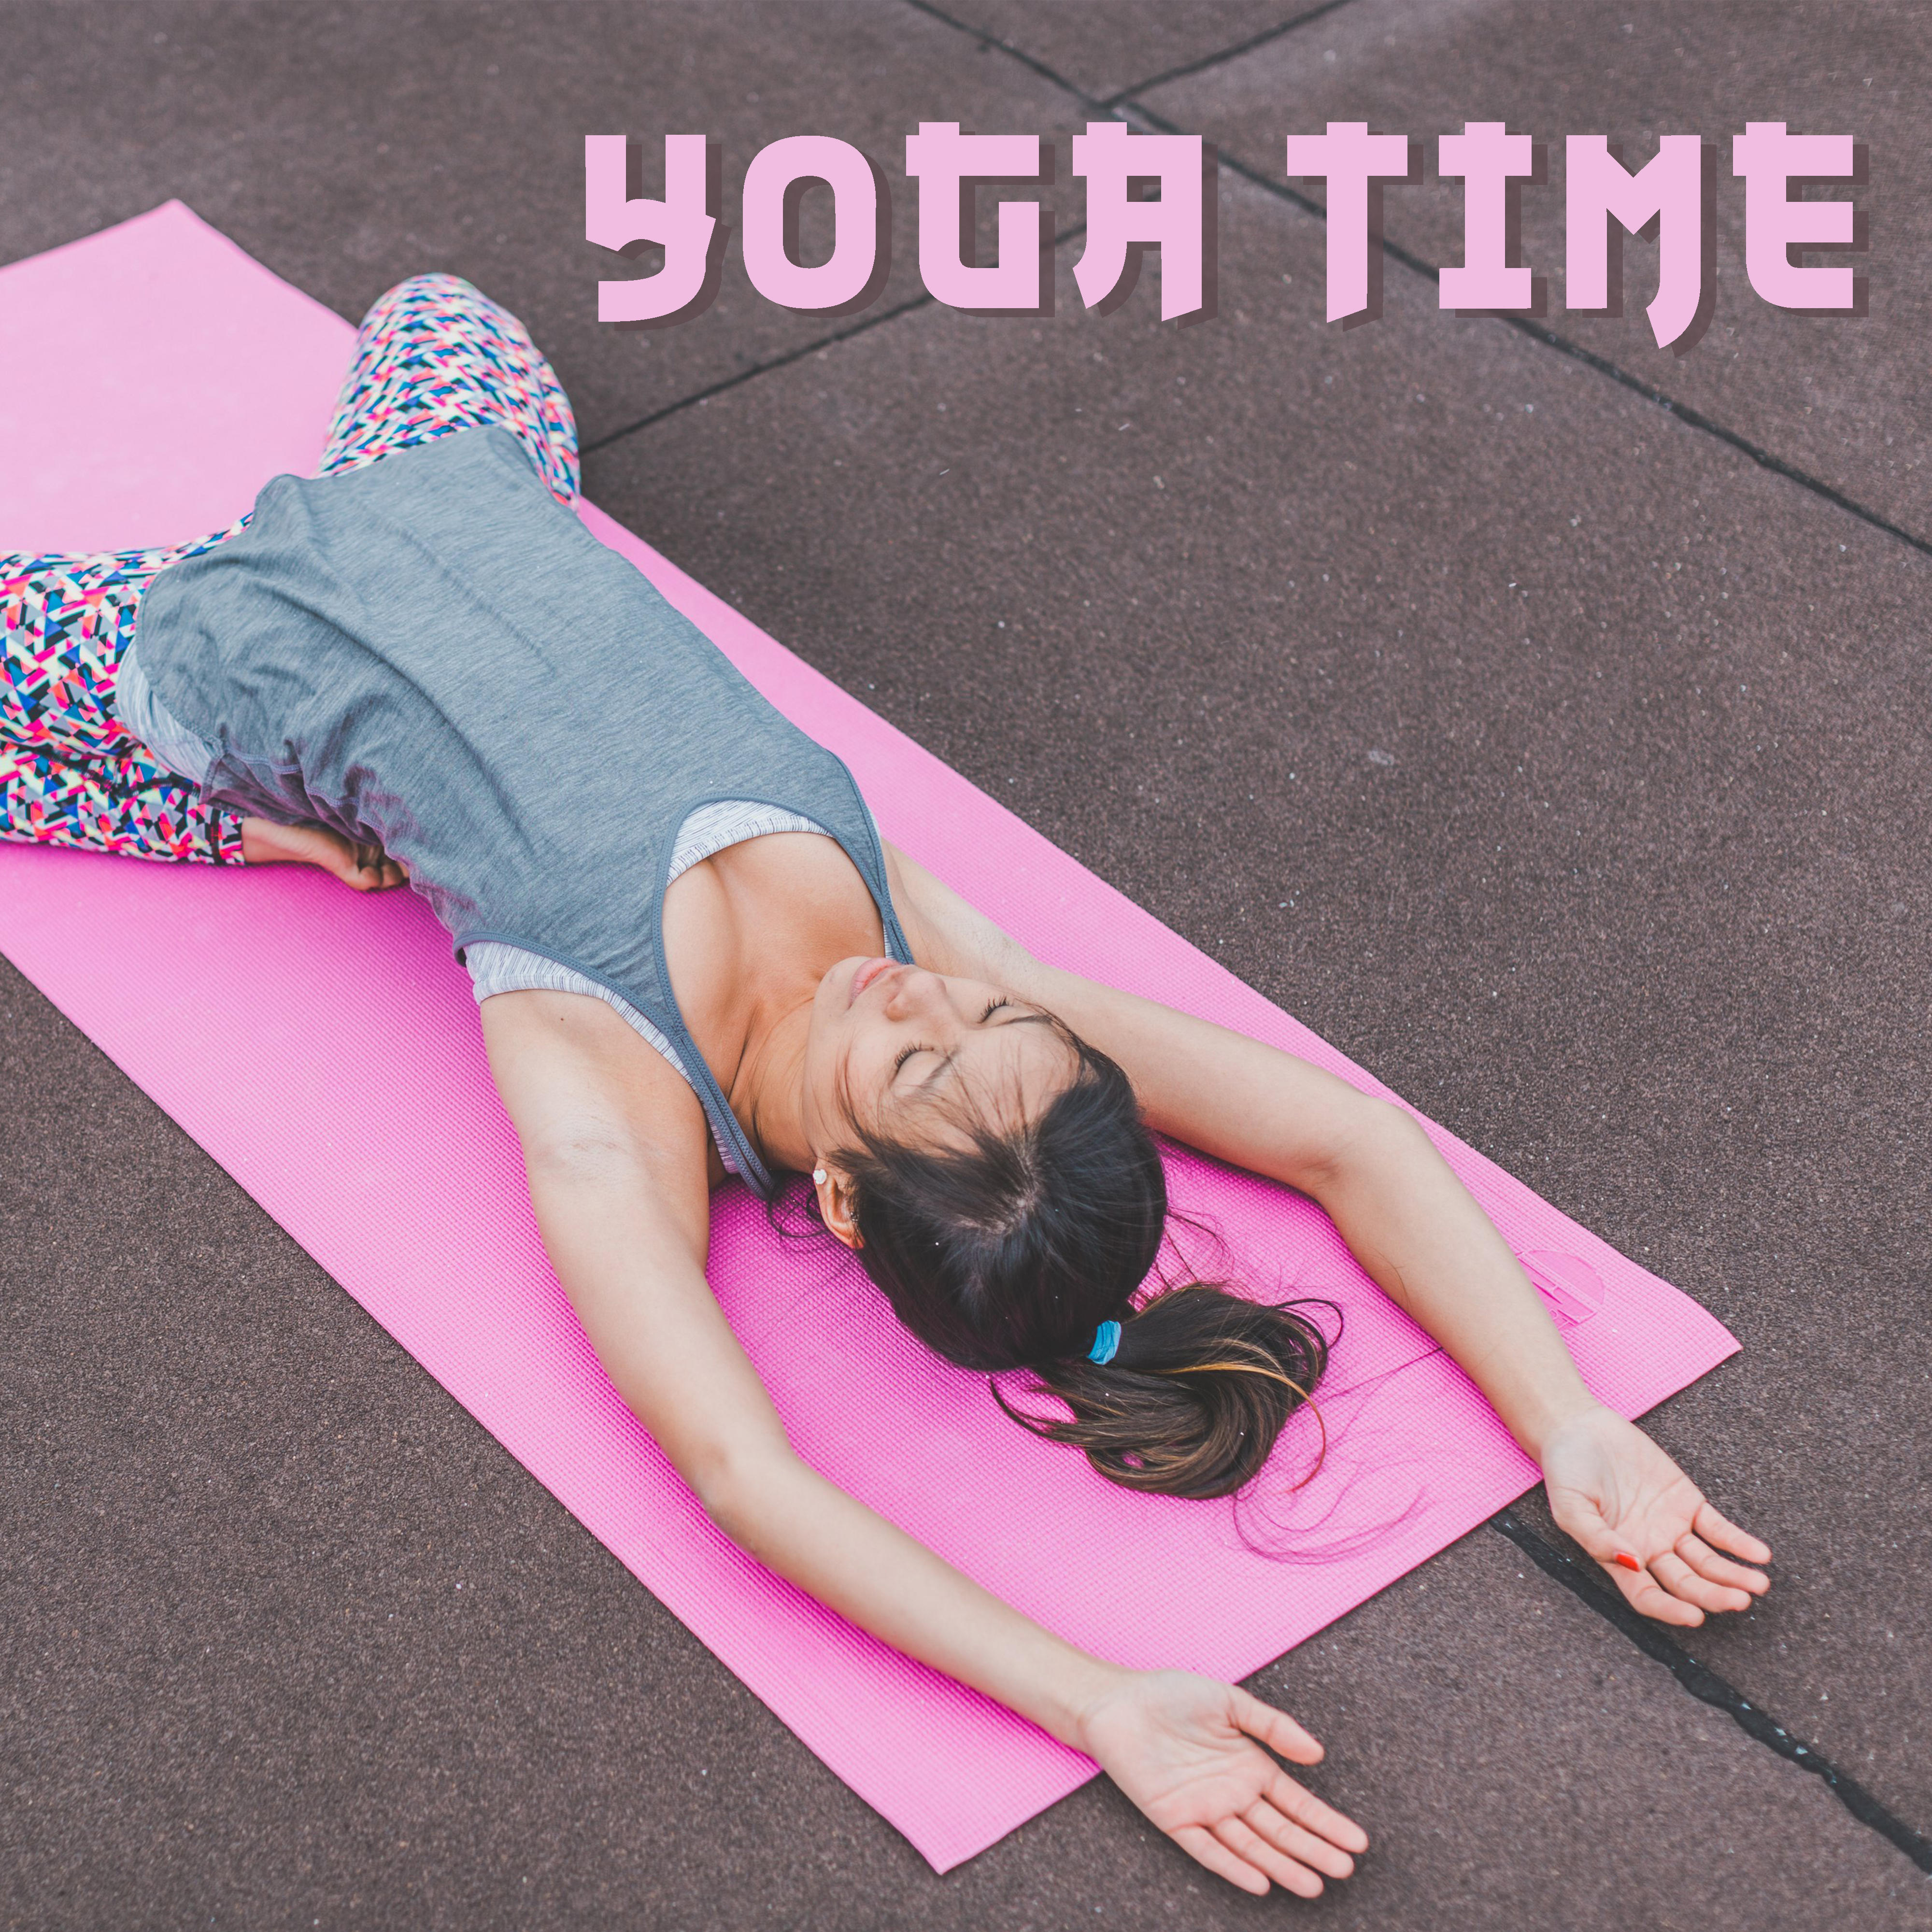 Yoga Time – New Music for Meditation, Yoga, Pilates, Contemplation, Deep Relax Body & Mind